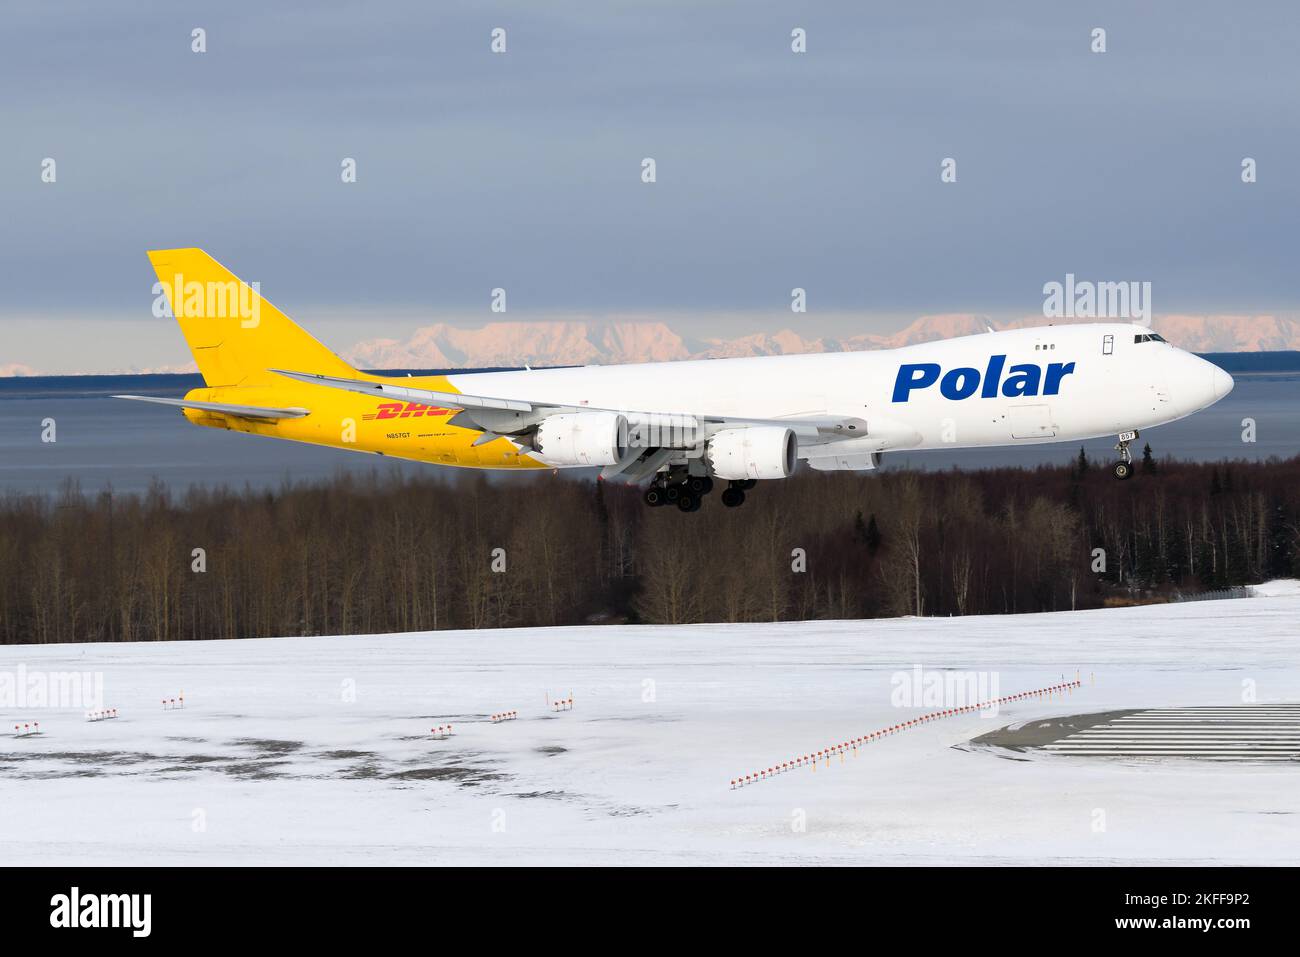 Polar Air Cargo Boeing 747-8F aircraft arriving at Anchorage Airport. Airplane 747-8 for cargo transport of Polar Air landing. Plane N857GT. Stock Photo